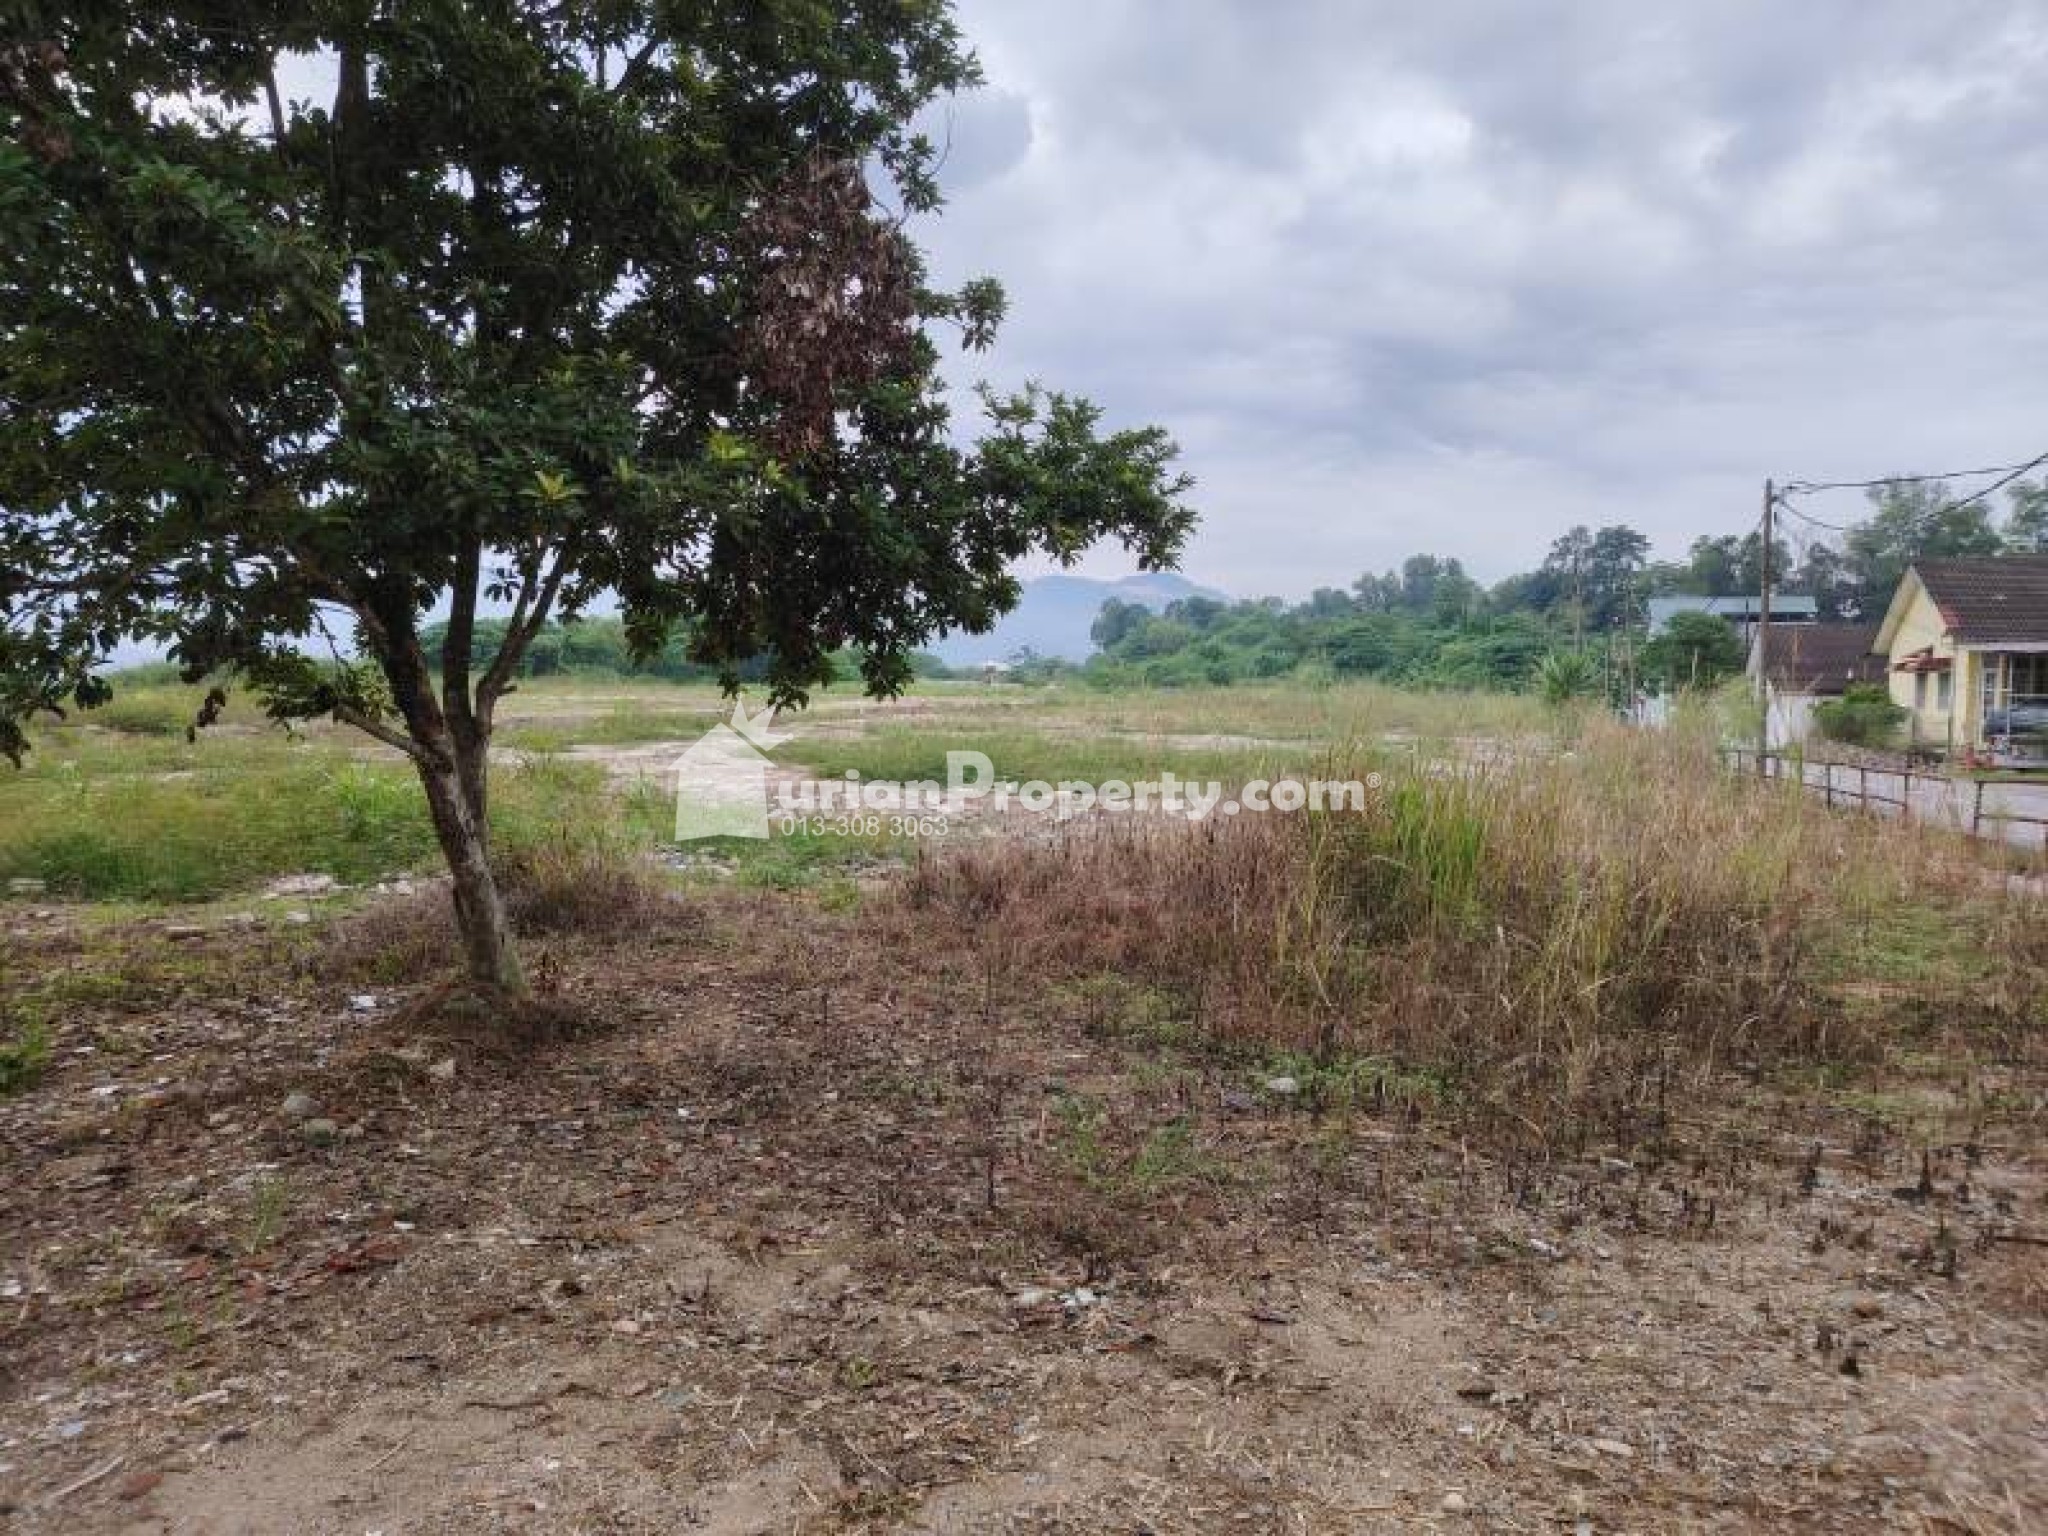 Residential Land For Sale at Hulu Langat